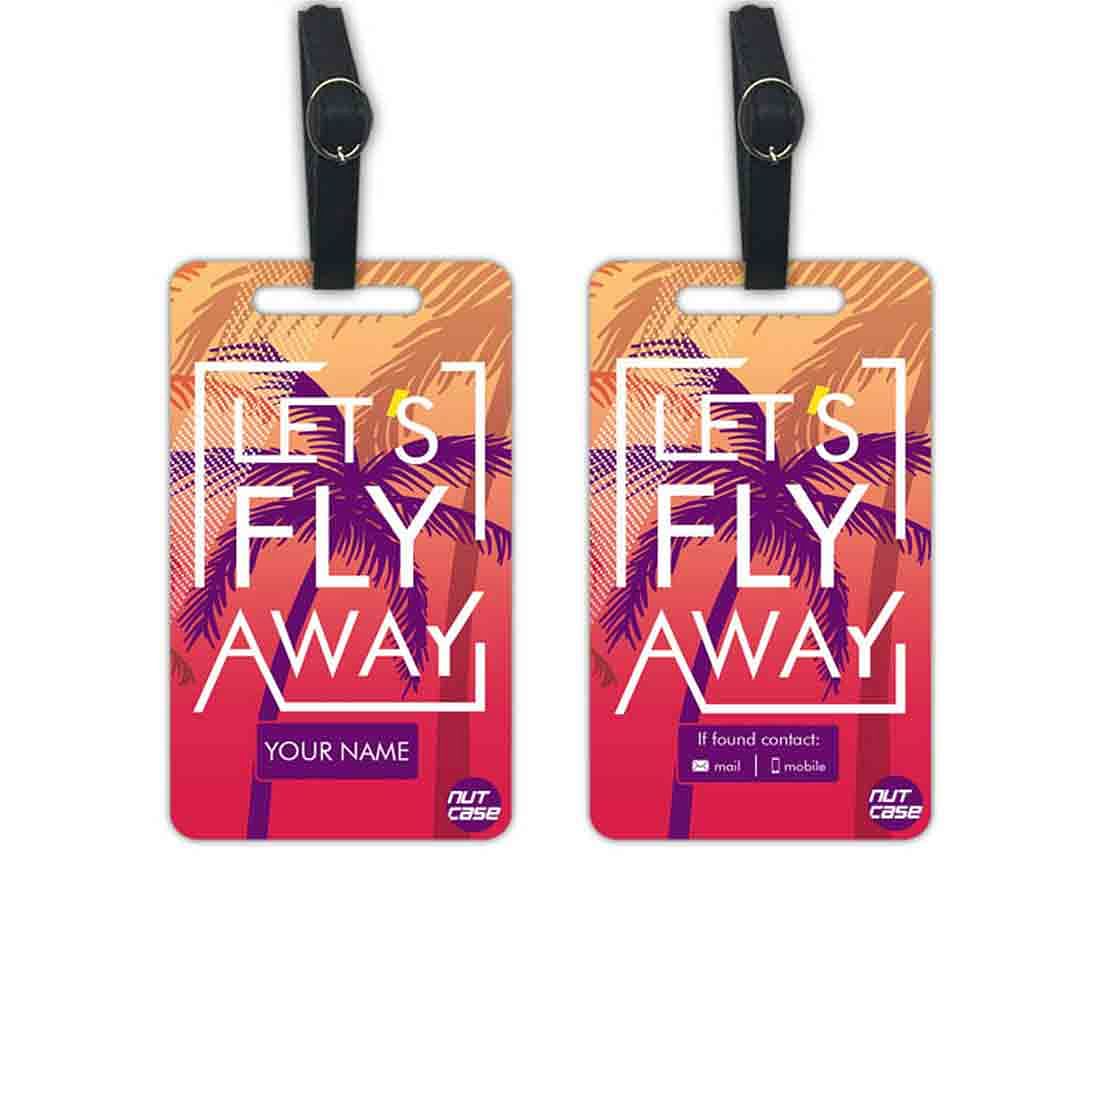 Personalized Name Luggage Tags Gift Set  - Add your Name - Set of 2 Nutcase